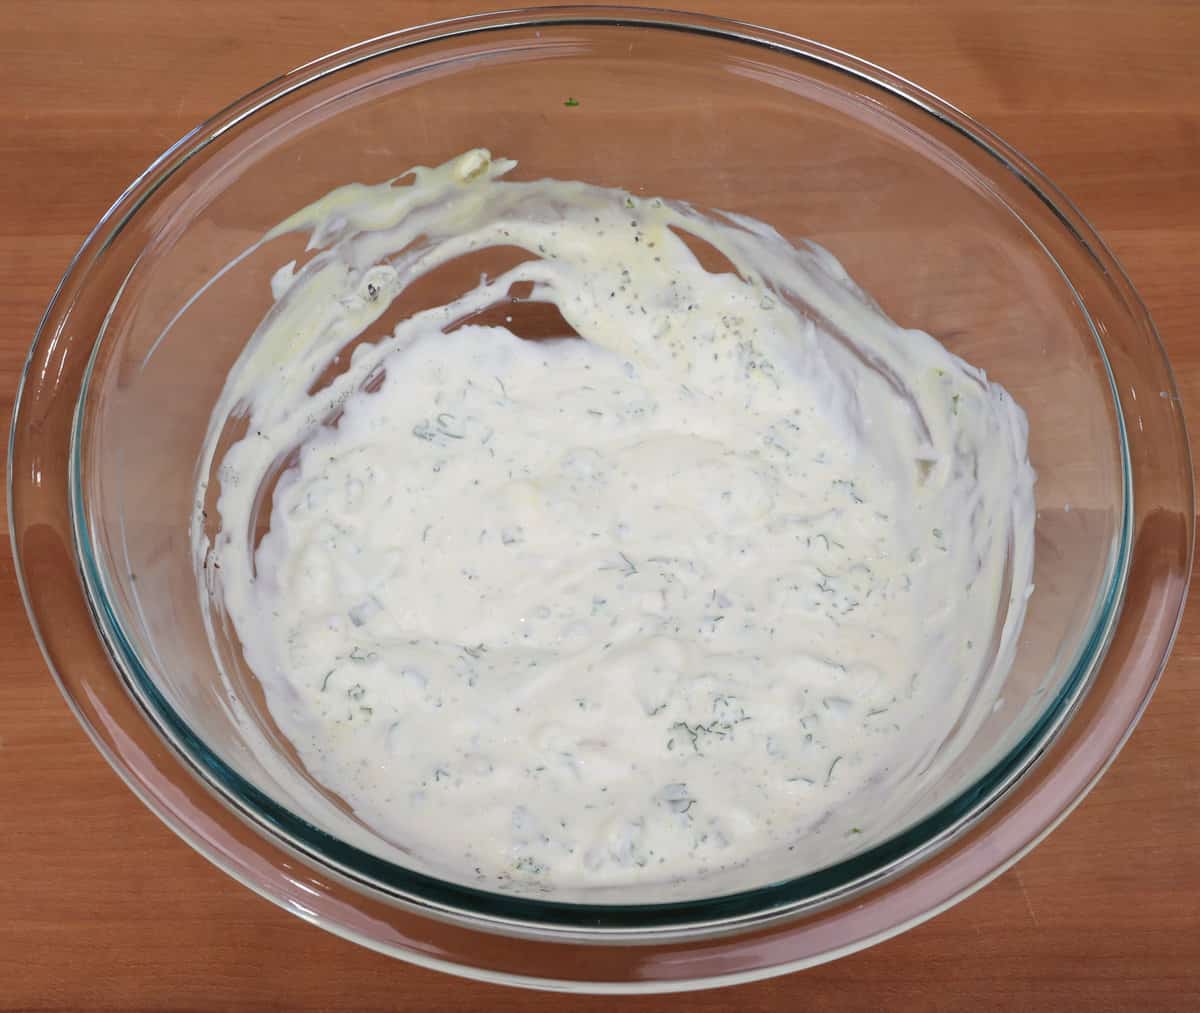 macaroni salad dressing in a small bowl.